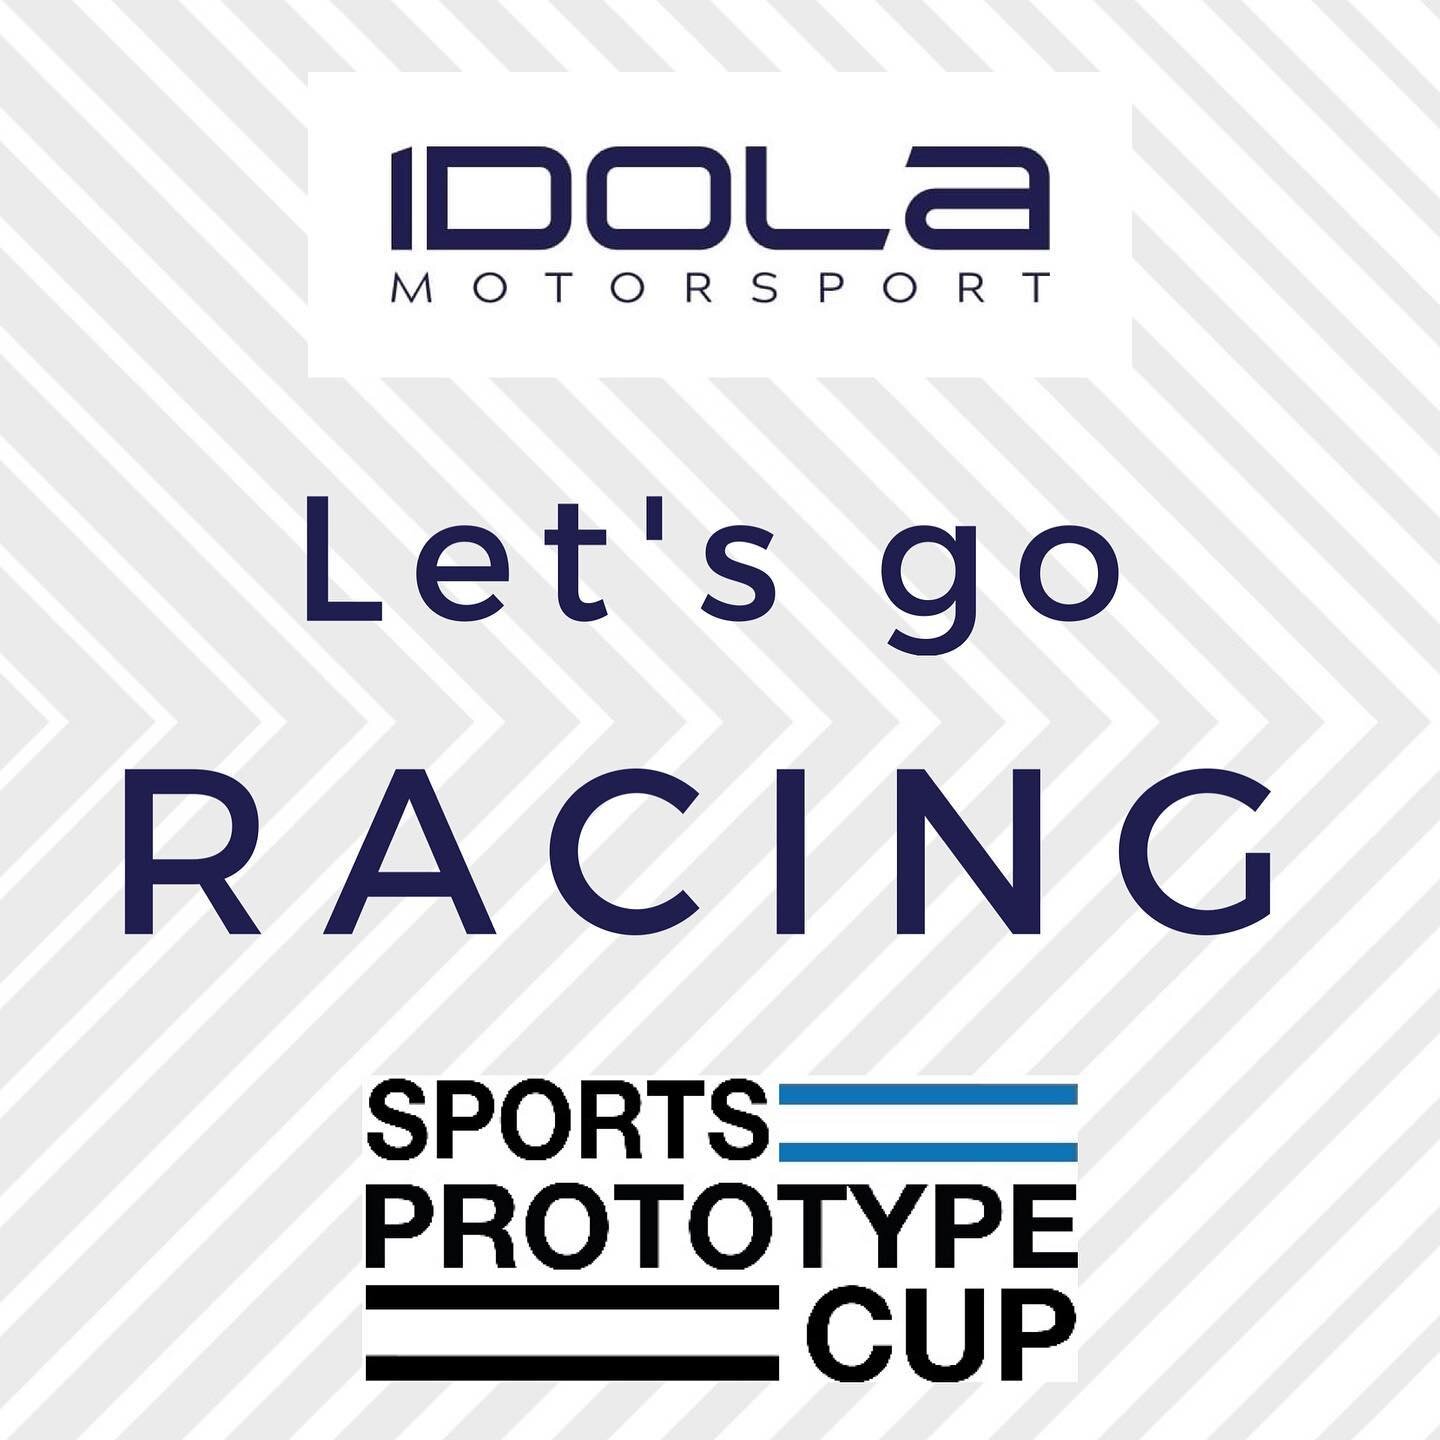 💥 Announcement 💥

@idolamotorsport are happy to announce that we will be joining @sportsprototypecup to race competitively against other prototypes this season!

Our first round will be Silverstone on the 20th May watch this space for more details.